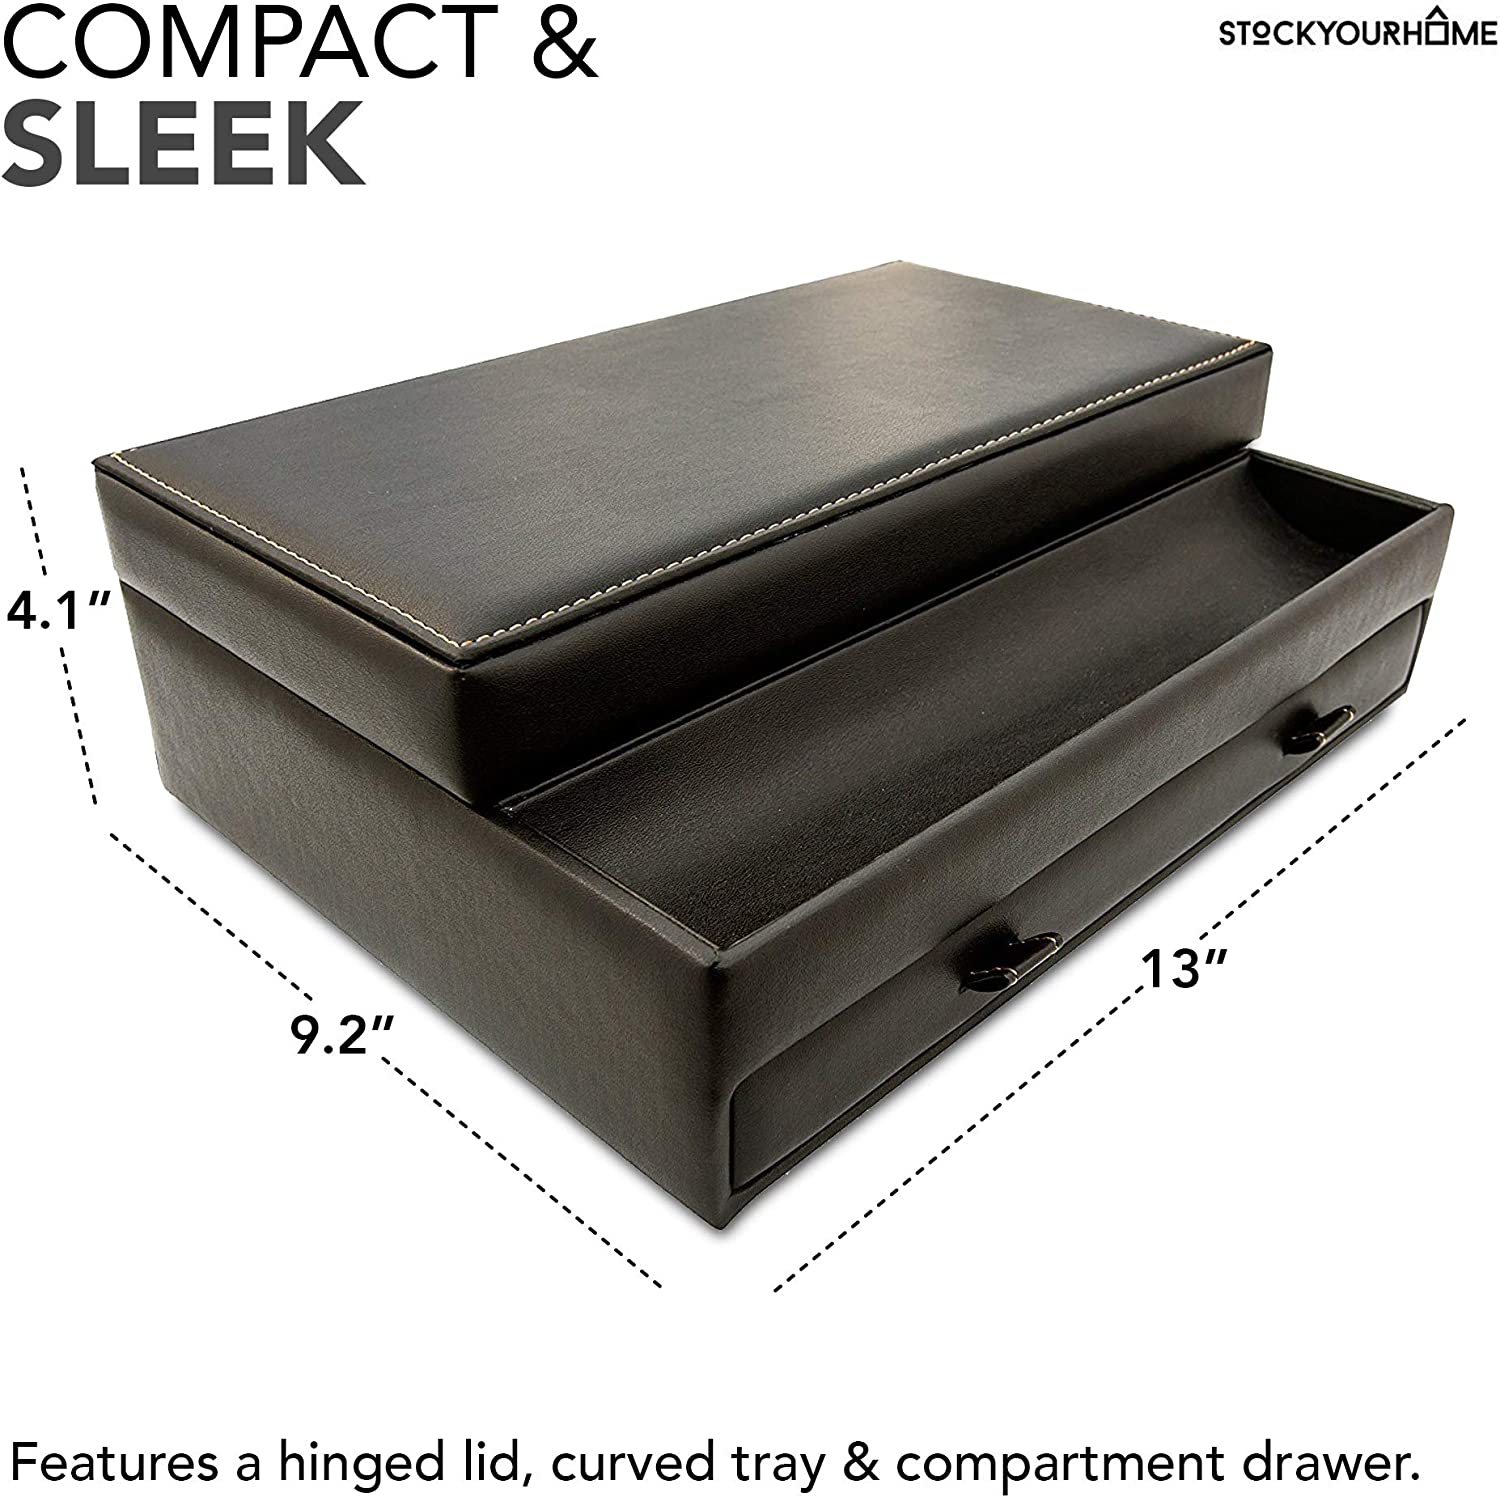 Stock Your Home Mens Valet Tray, Men's Jewelry Box, Night Stand Organizers and Storage, Bedside Table Organizer, Watch Box for Dresser, Faux Leather (Black & Beige)